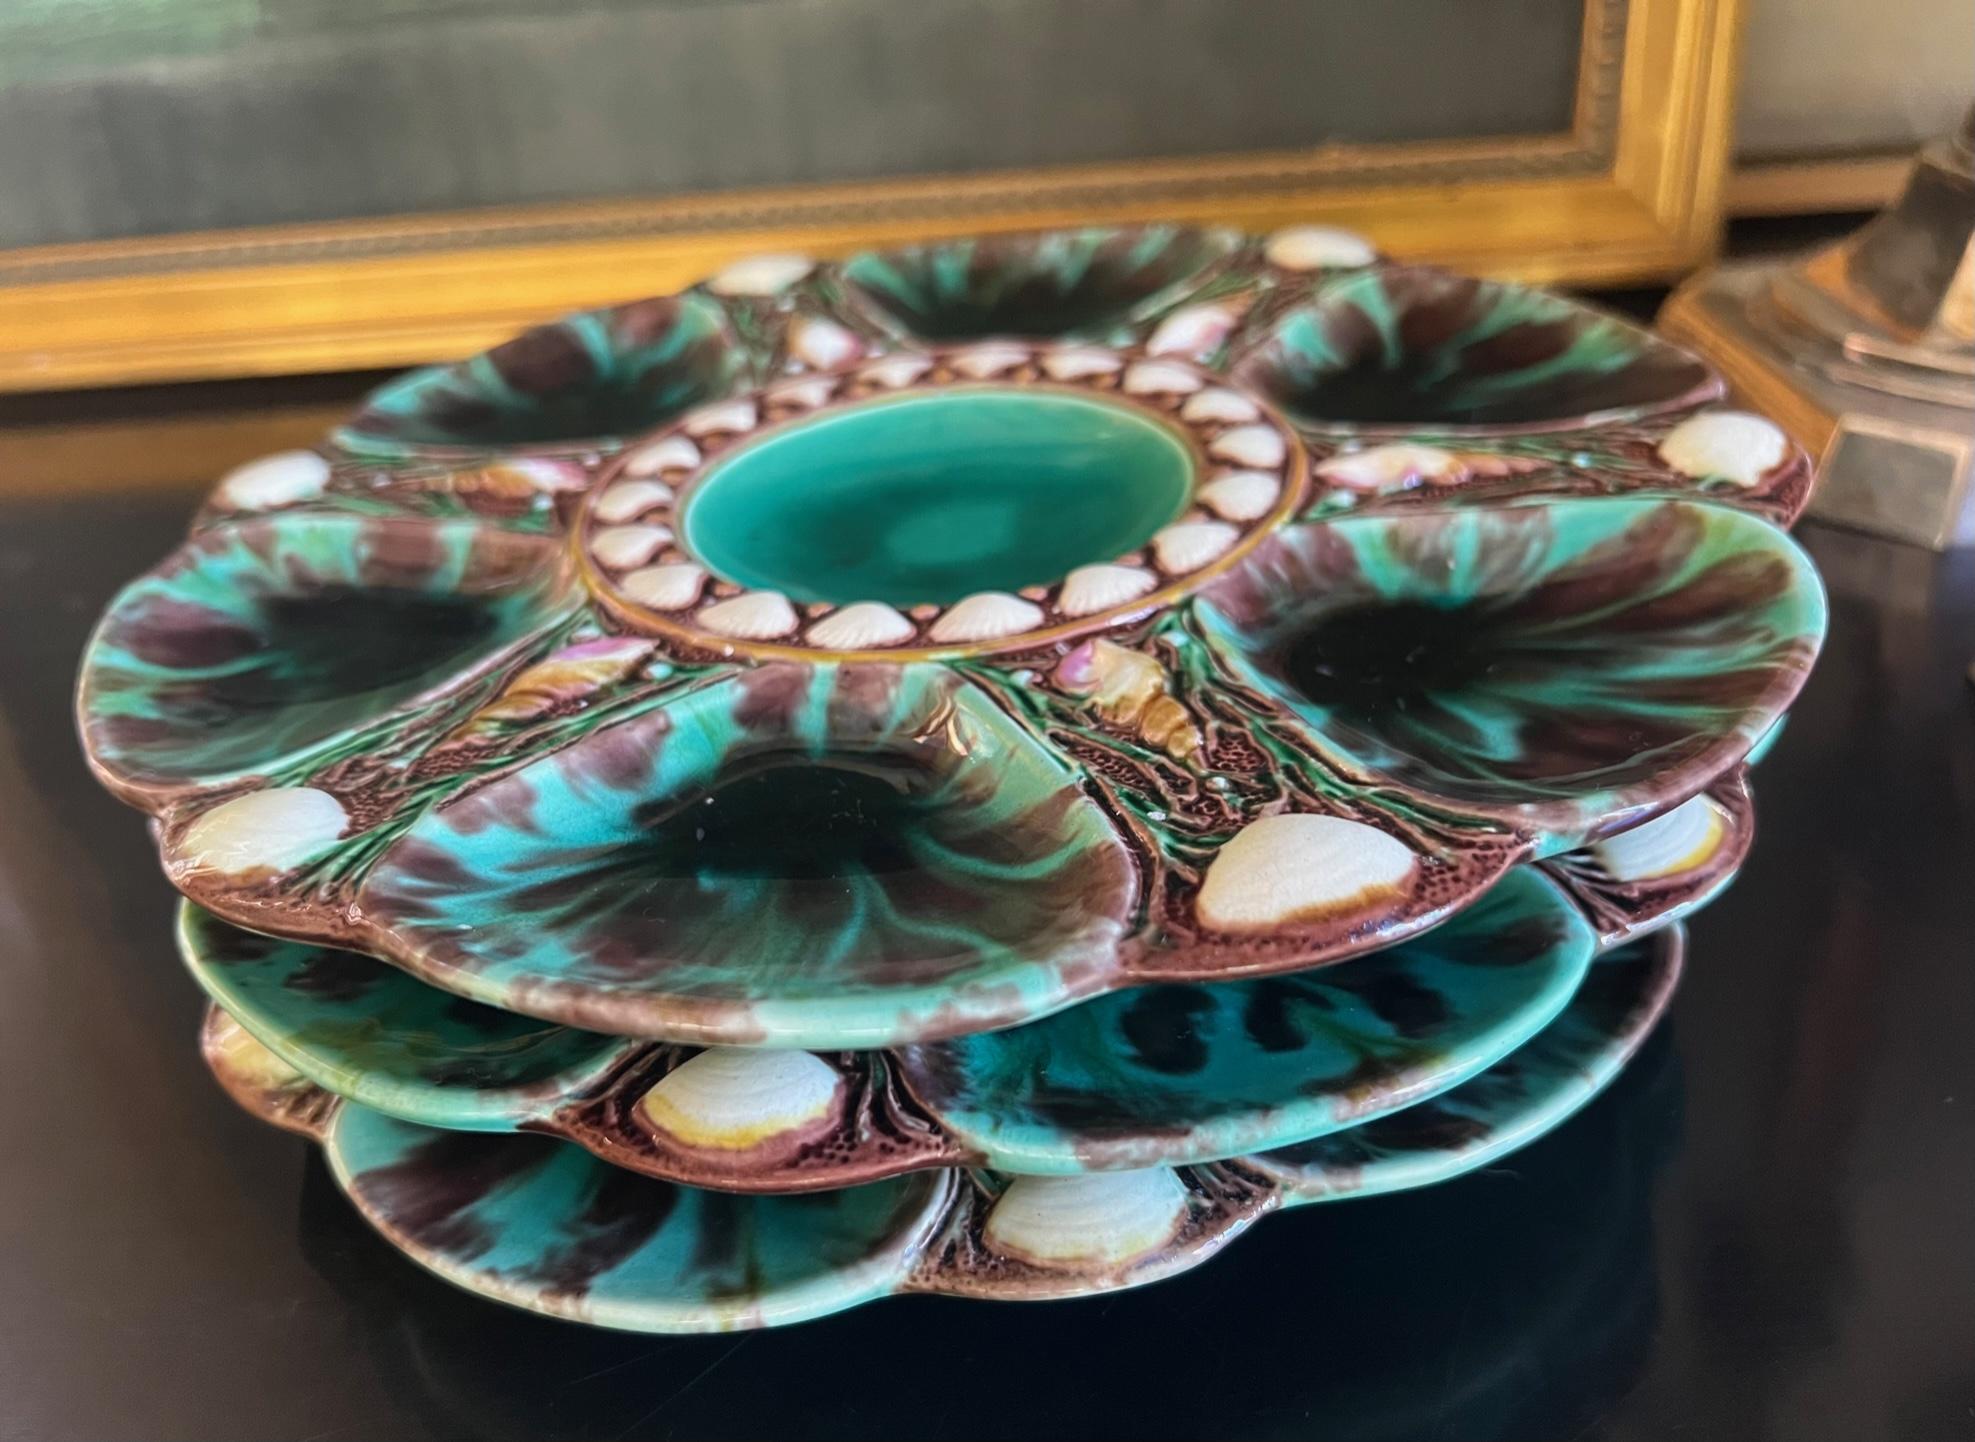 Antique Minton Green Majolica Oyster Plate, circa 1860's-1870's For Sale 8